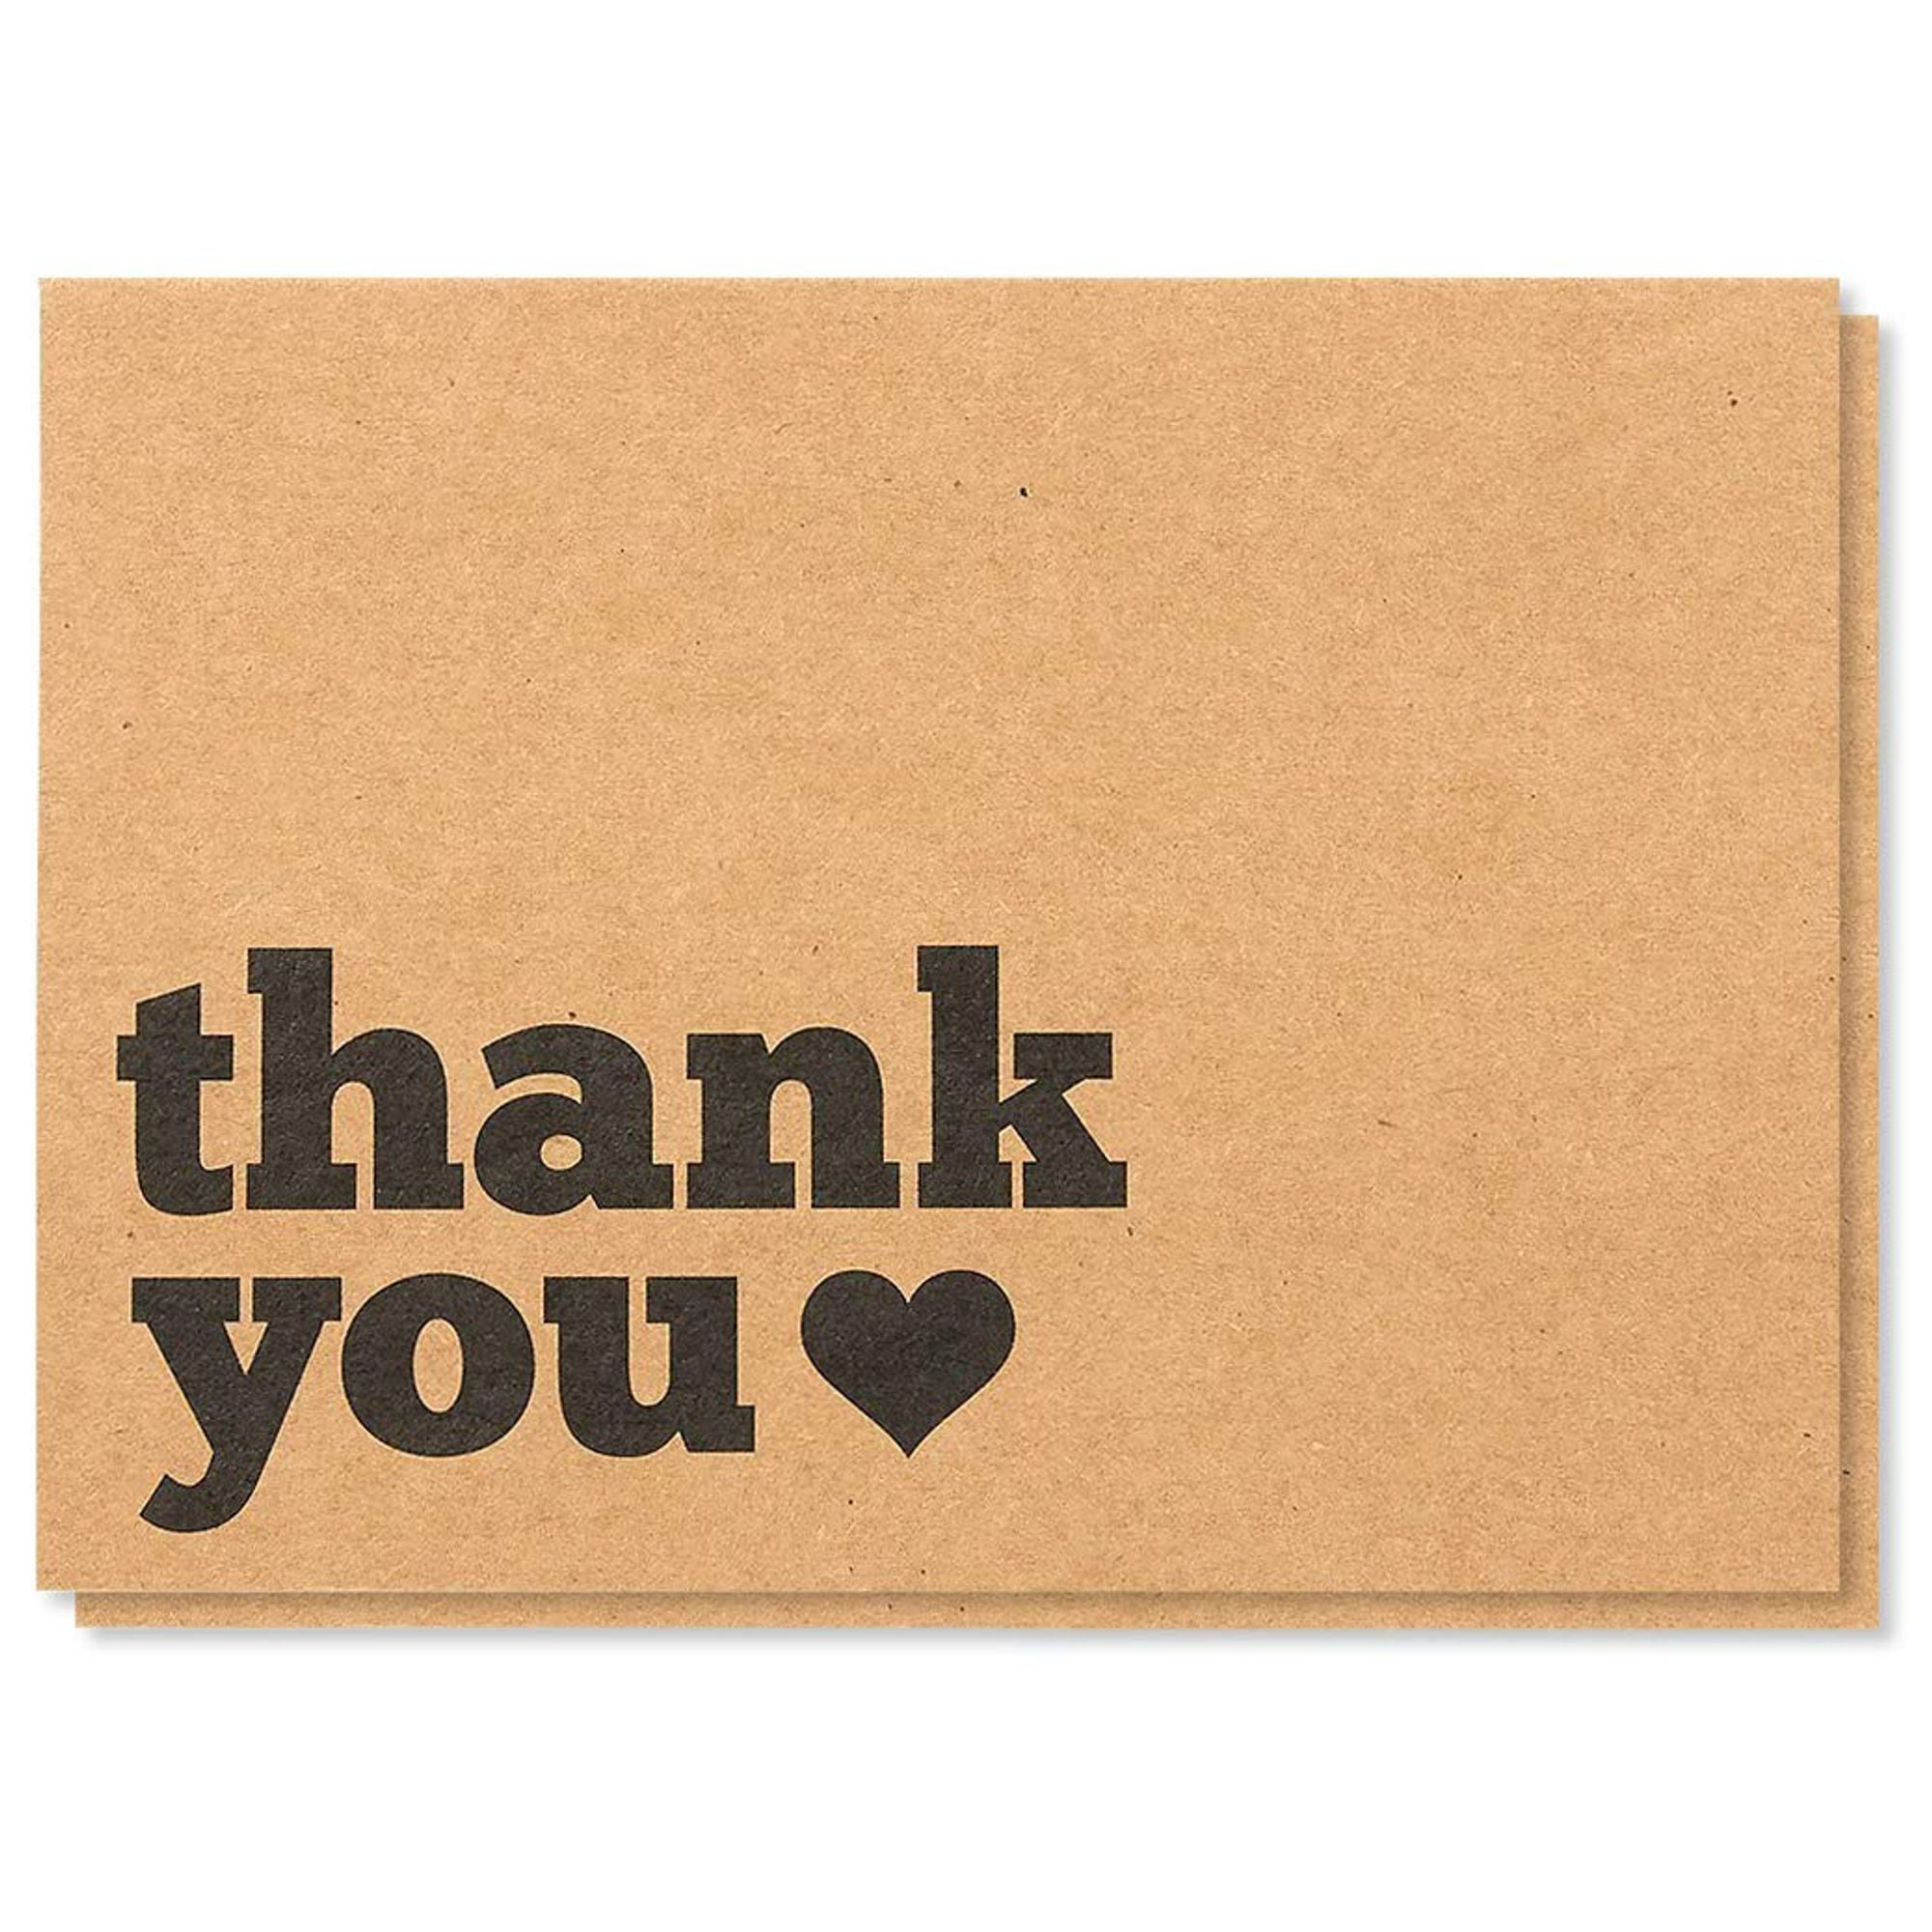 120-Count Thank You Cards with Envelopes, Brown Kraft Paper, Bulk Value Pack, Ideal for Any